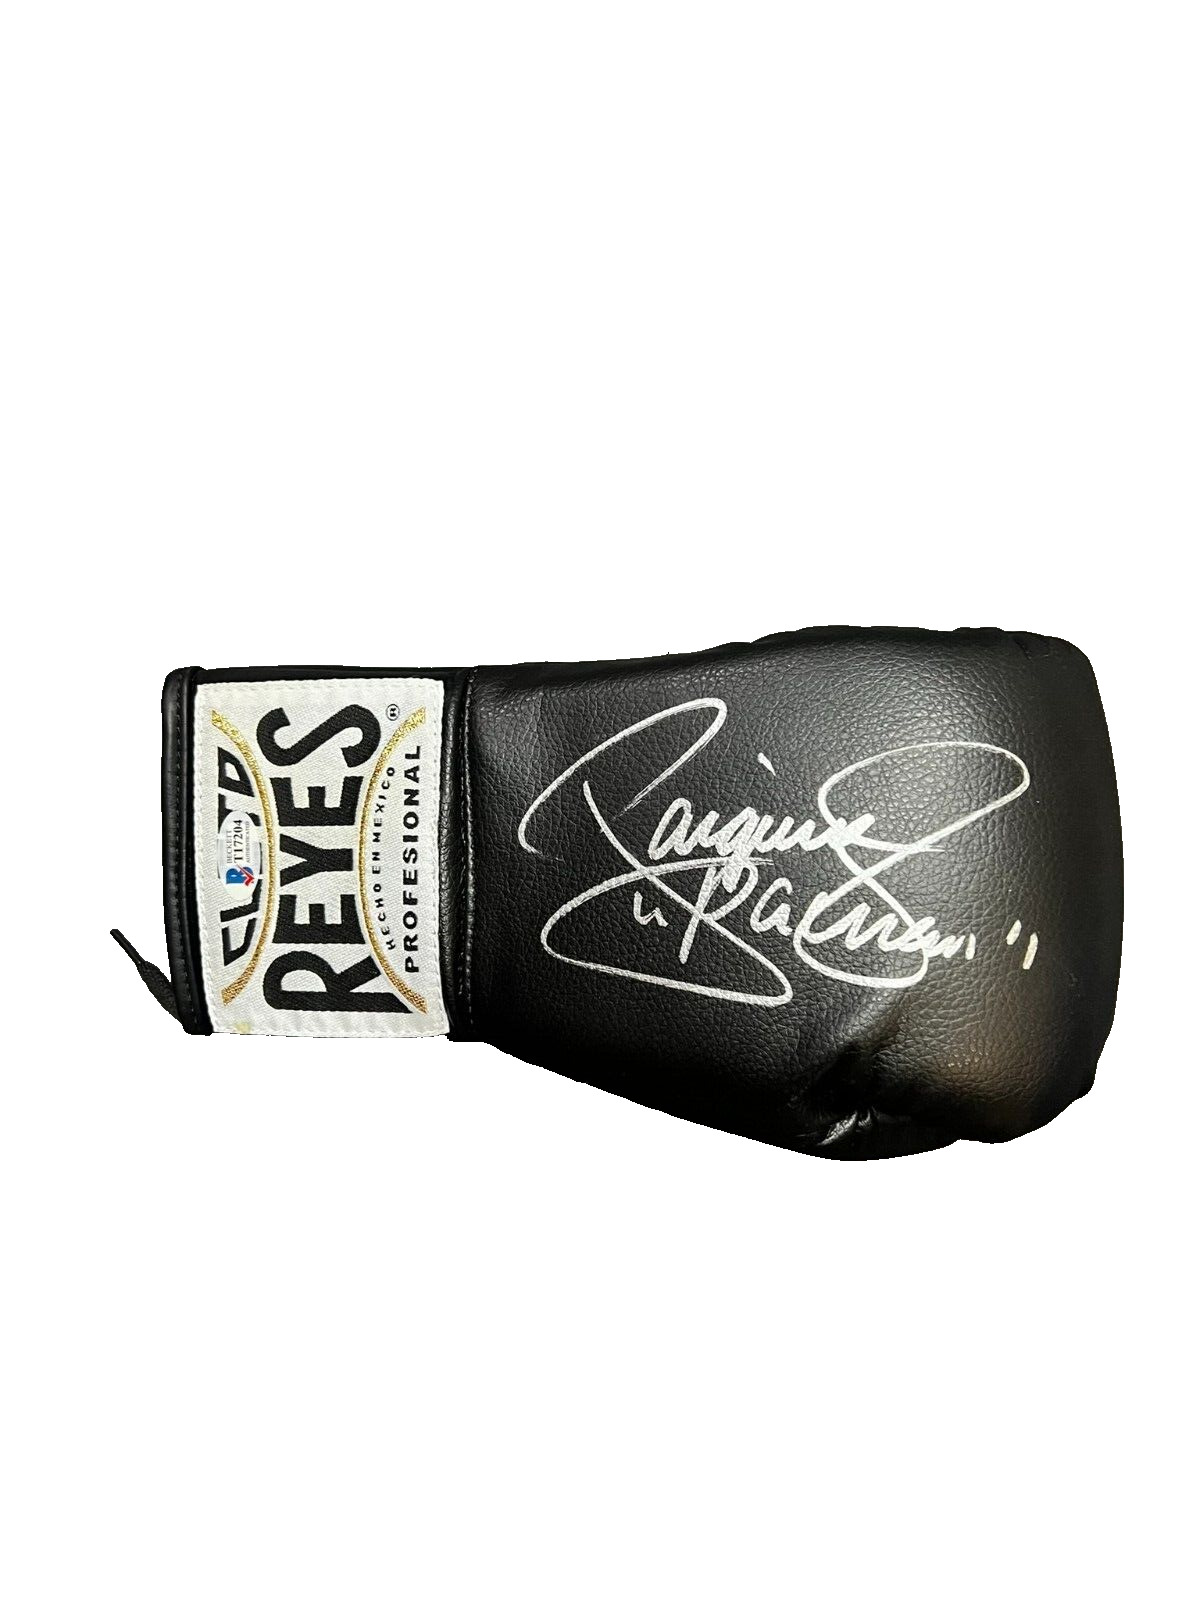 MANNY PACQUIAO SIGNED AUTOGRAPHED REYES BOXING GLOVE BECKETT COA